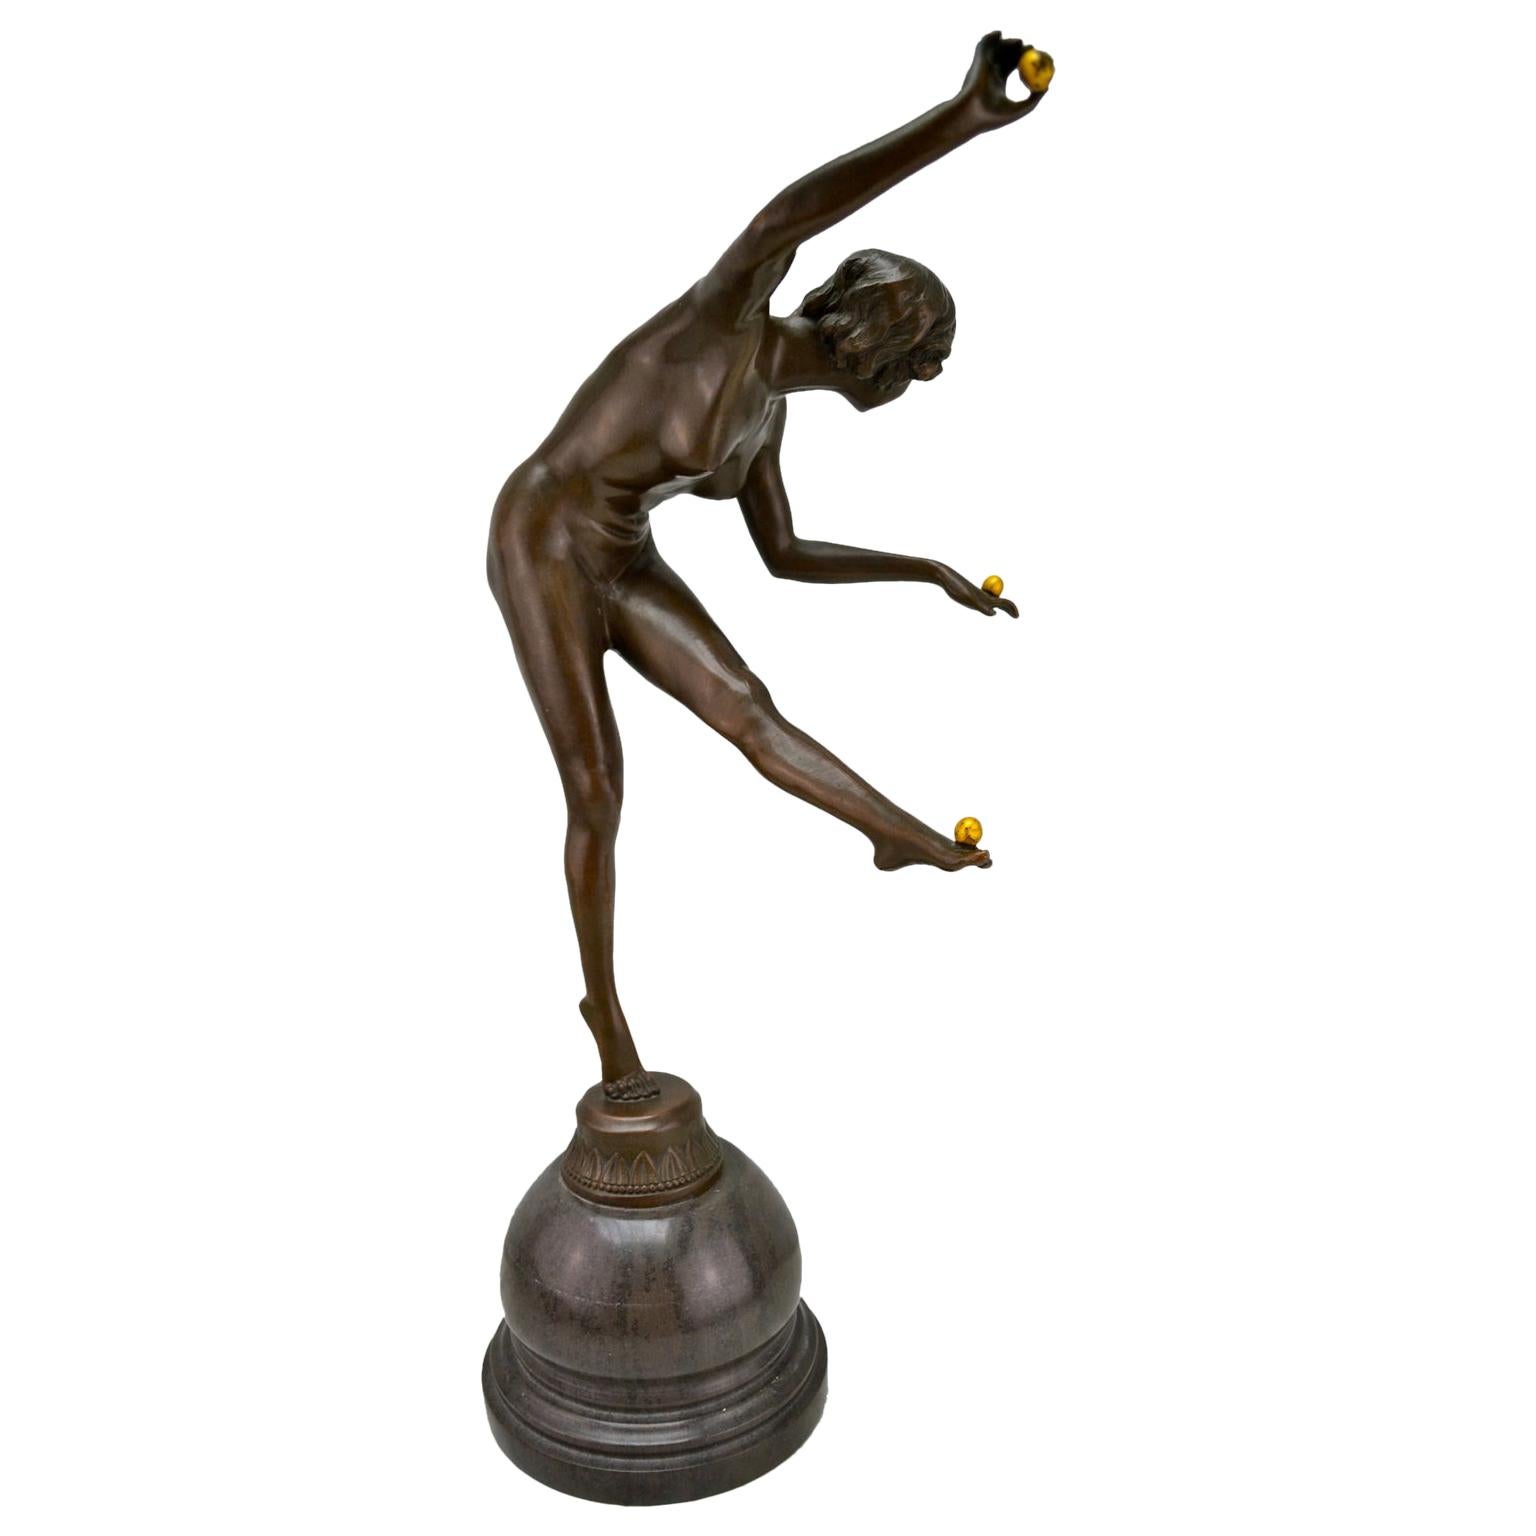 Bronze Female Nude Titled "The Trickstress" after Colinet